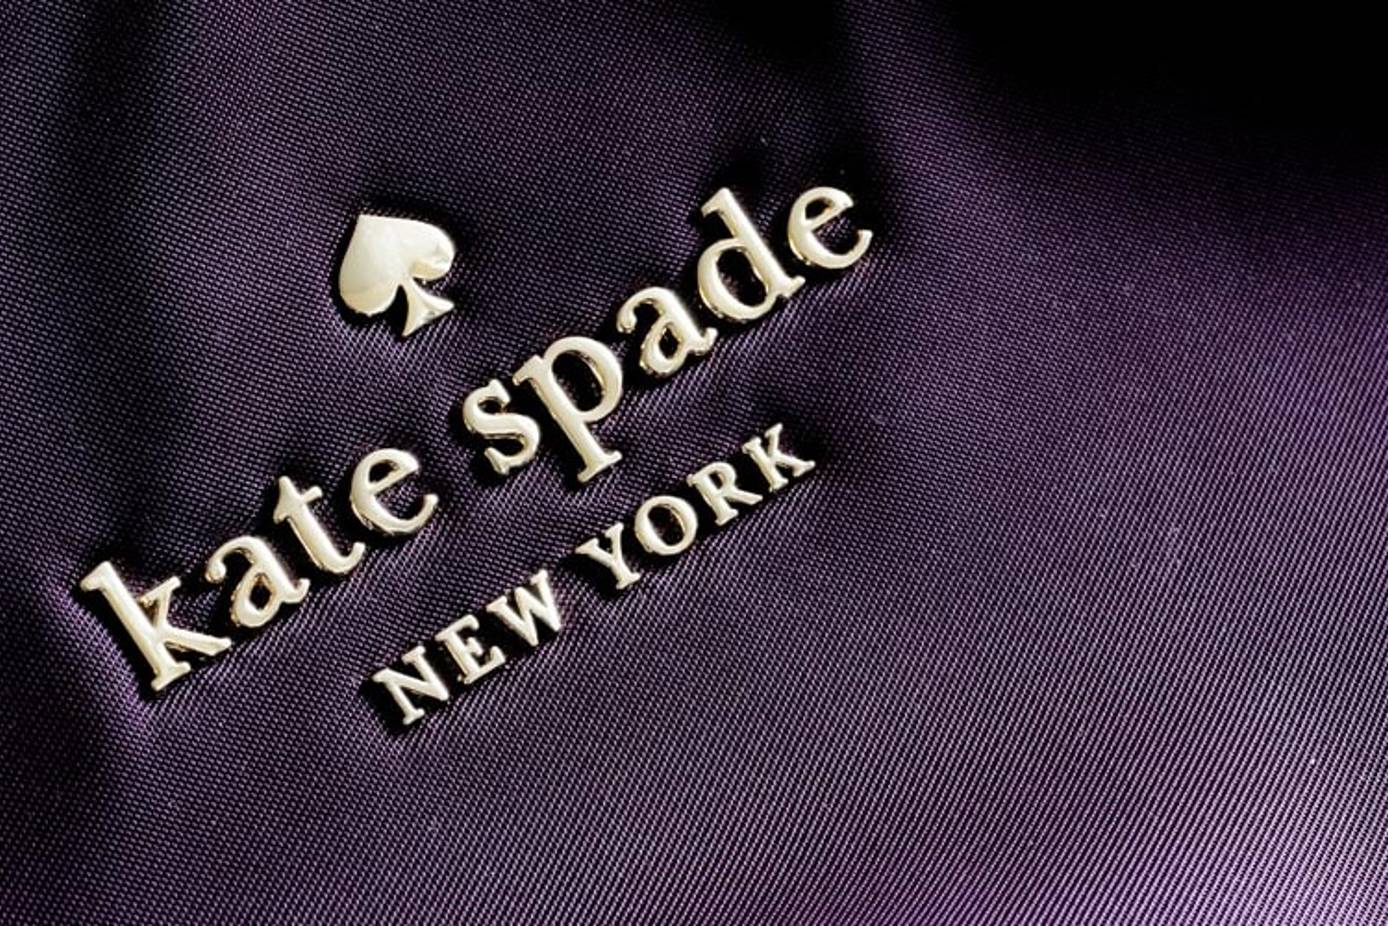 How France Valentine, Kate Spade's Clothing Label, Carries On